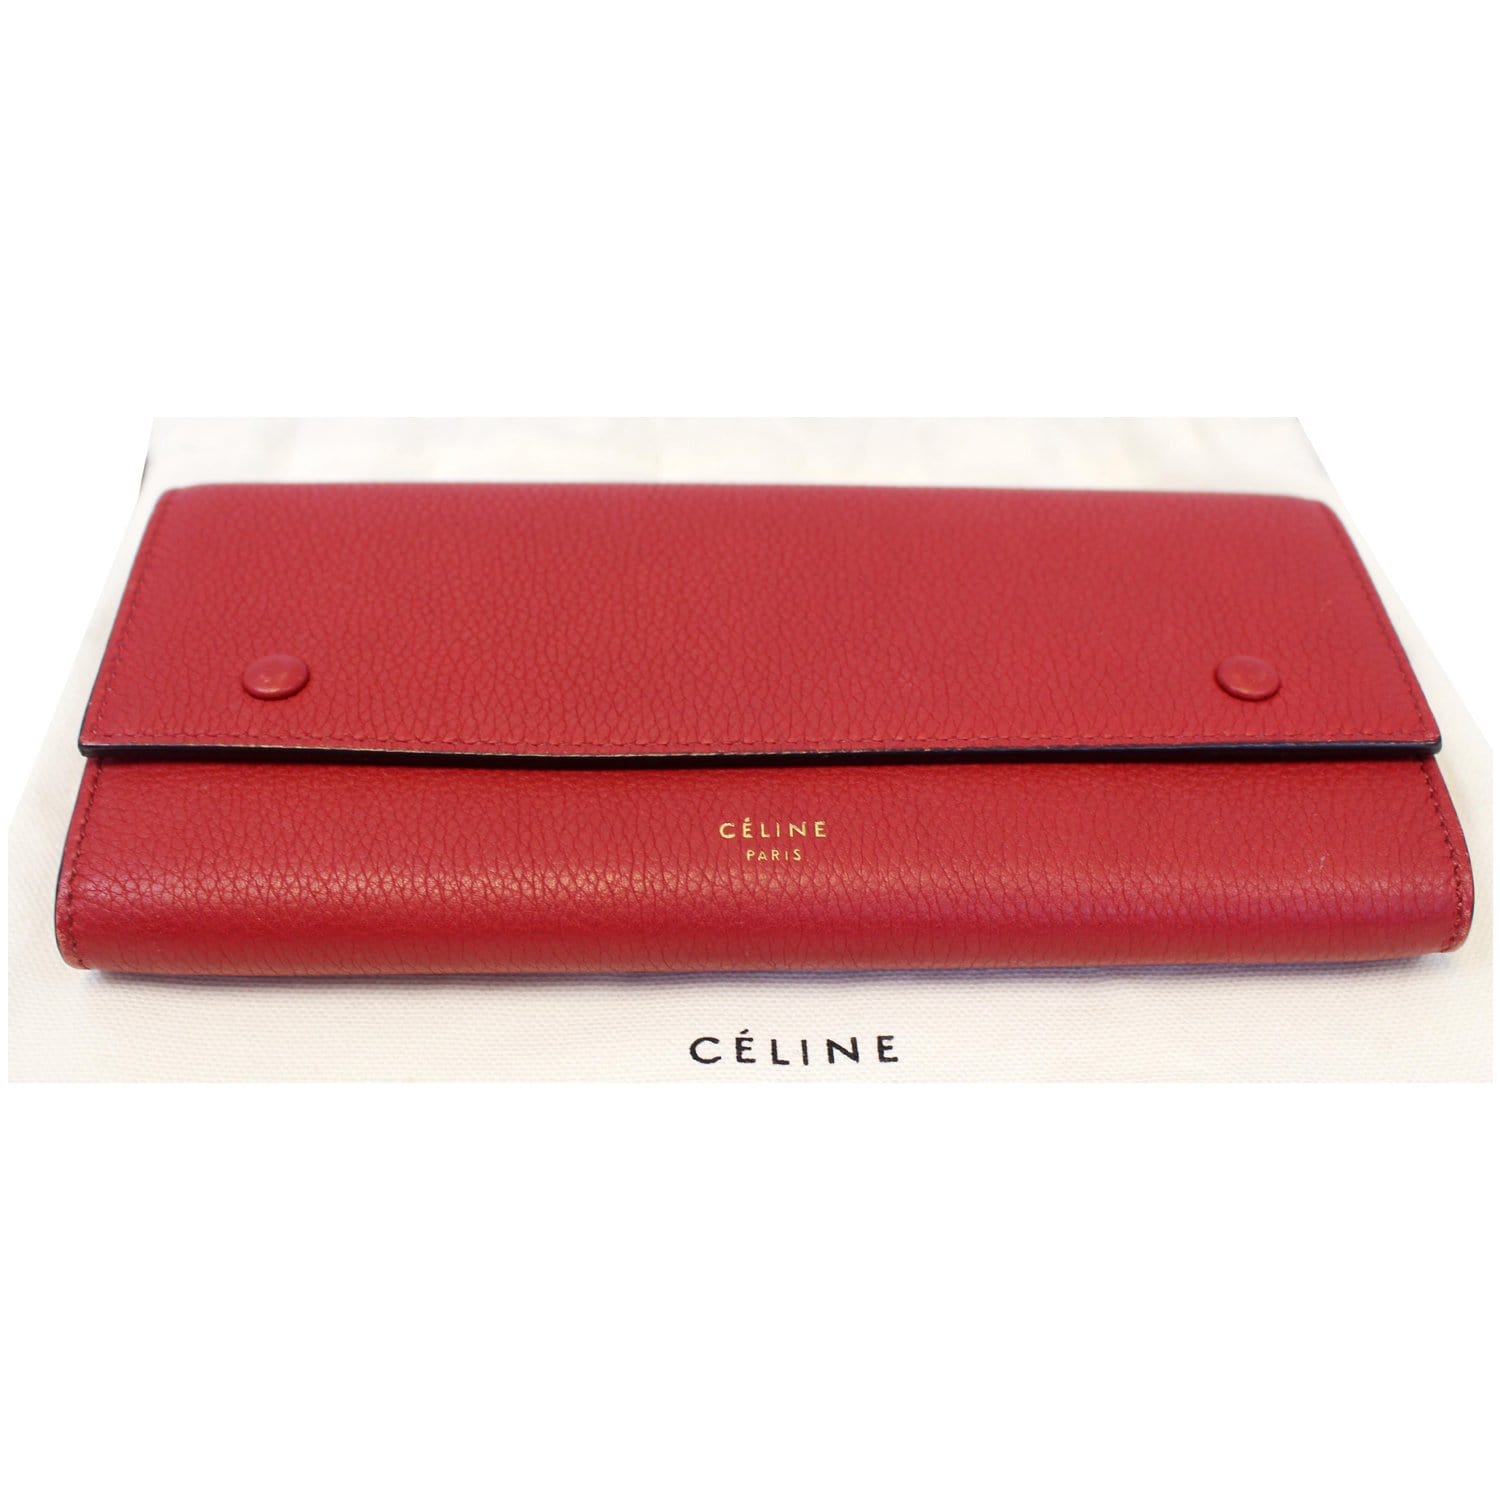 New Celine Paris Leather Red Card Holder Made in Italy